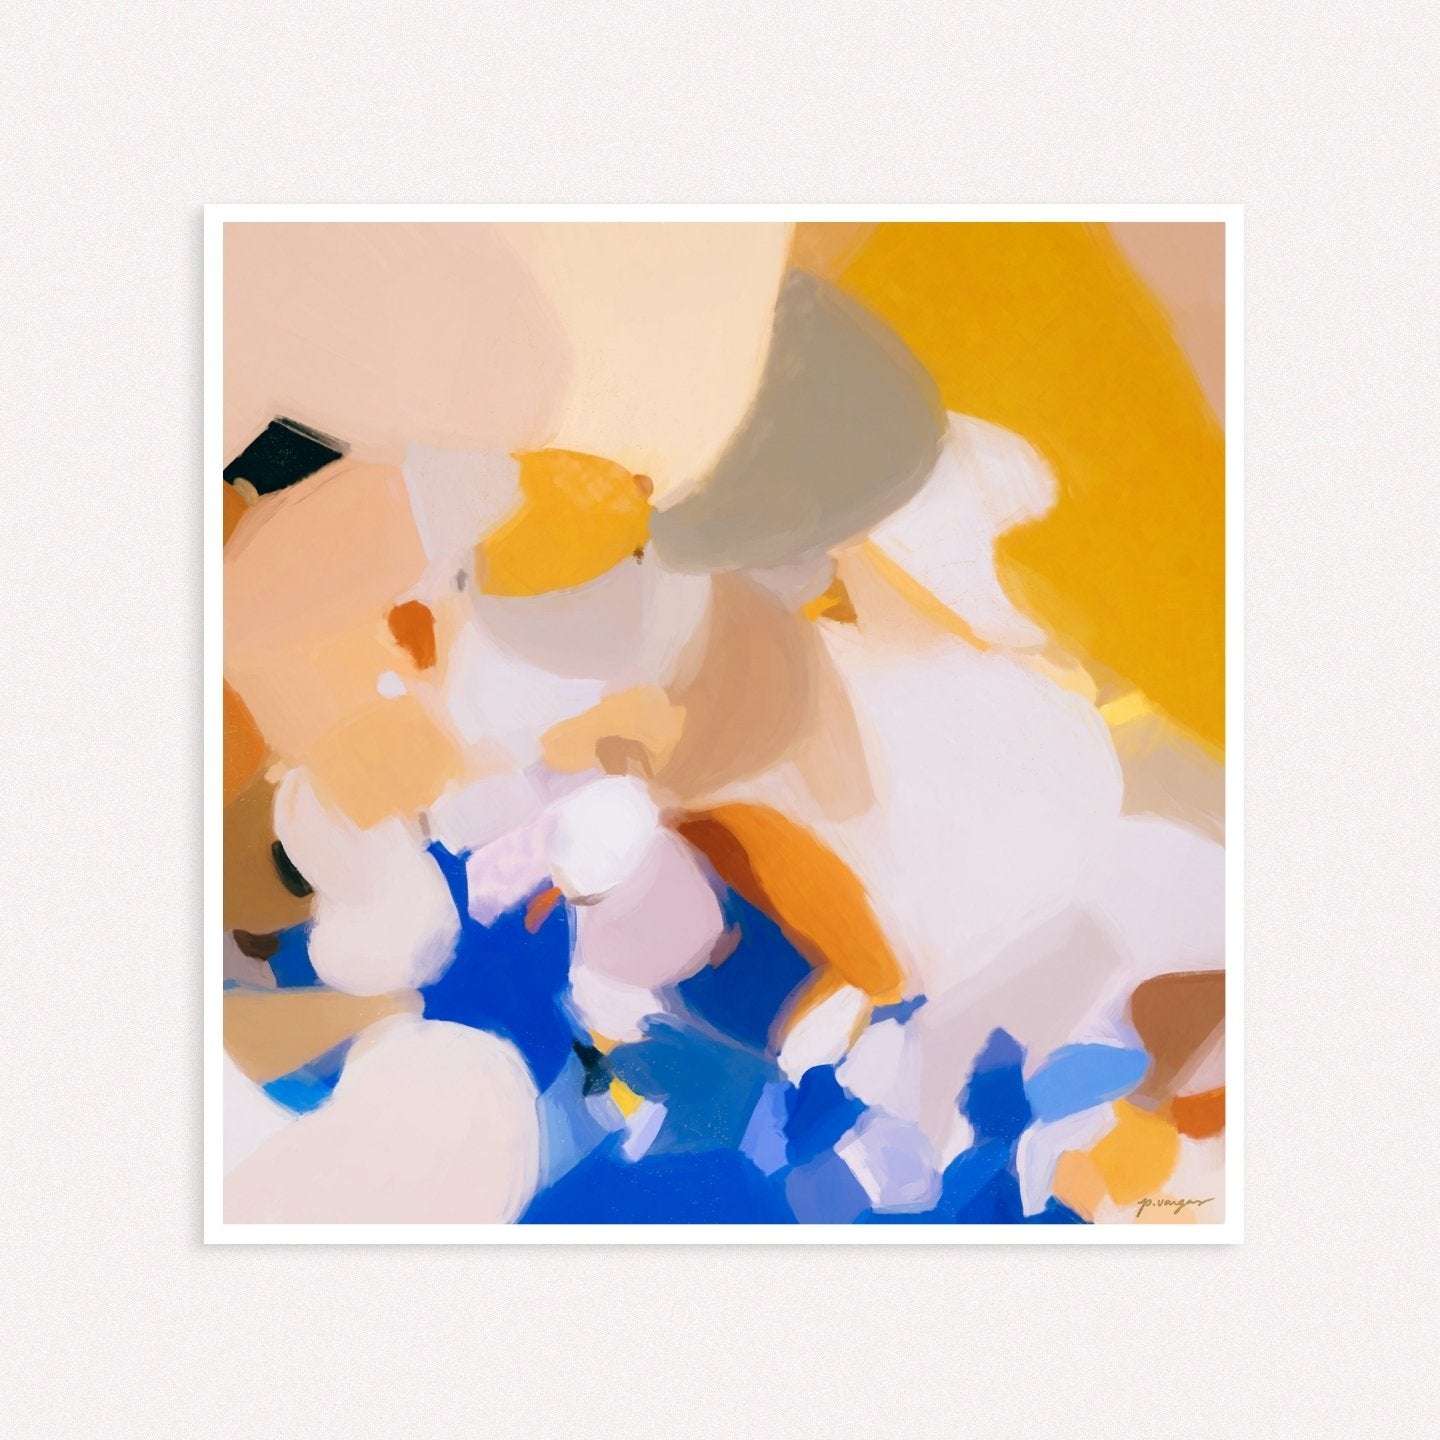 Joelle, yellow and blue colorful abstract wall art print by Parima Studio